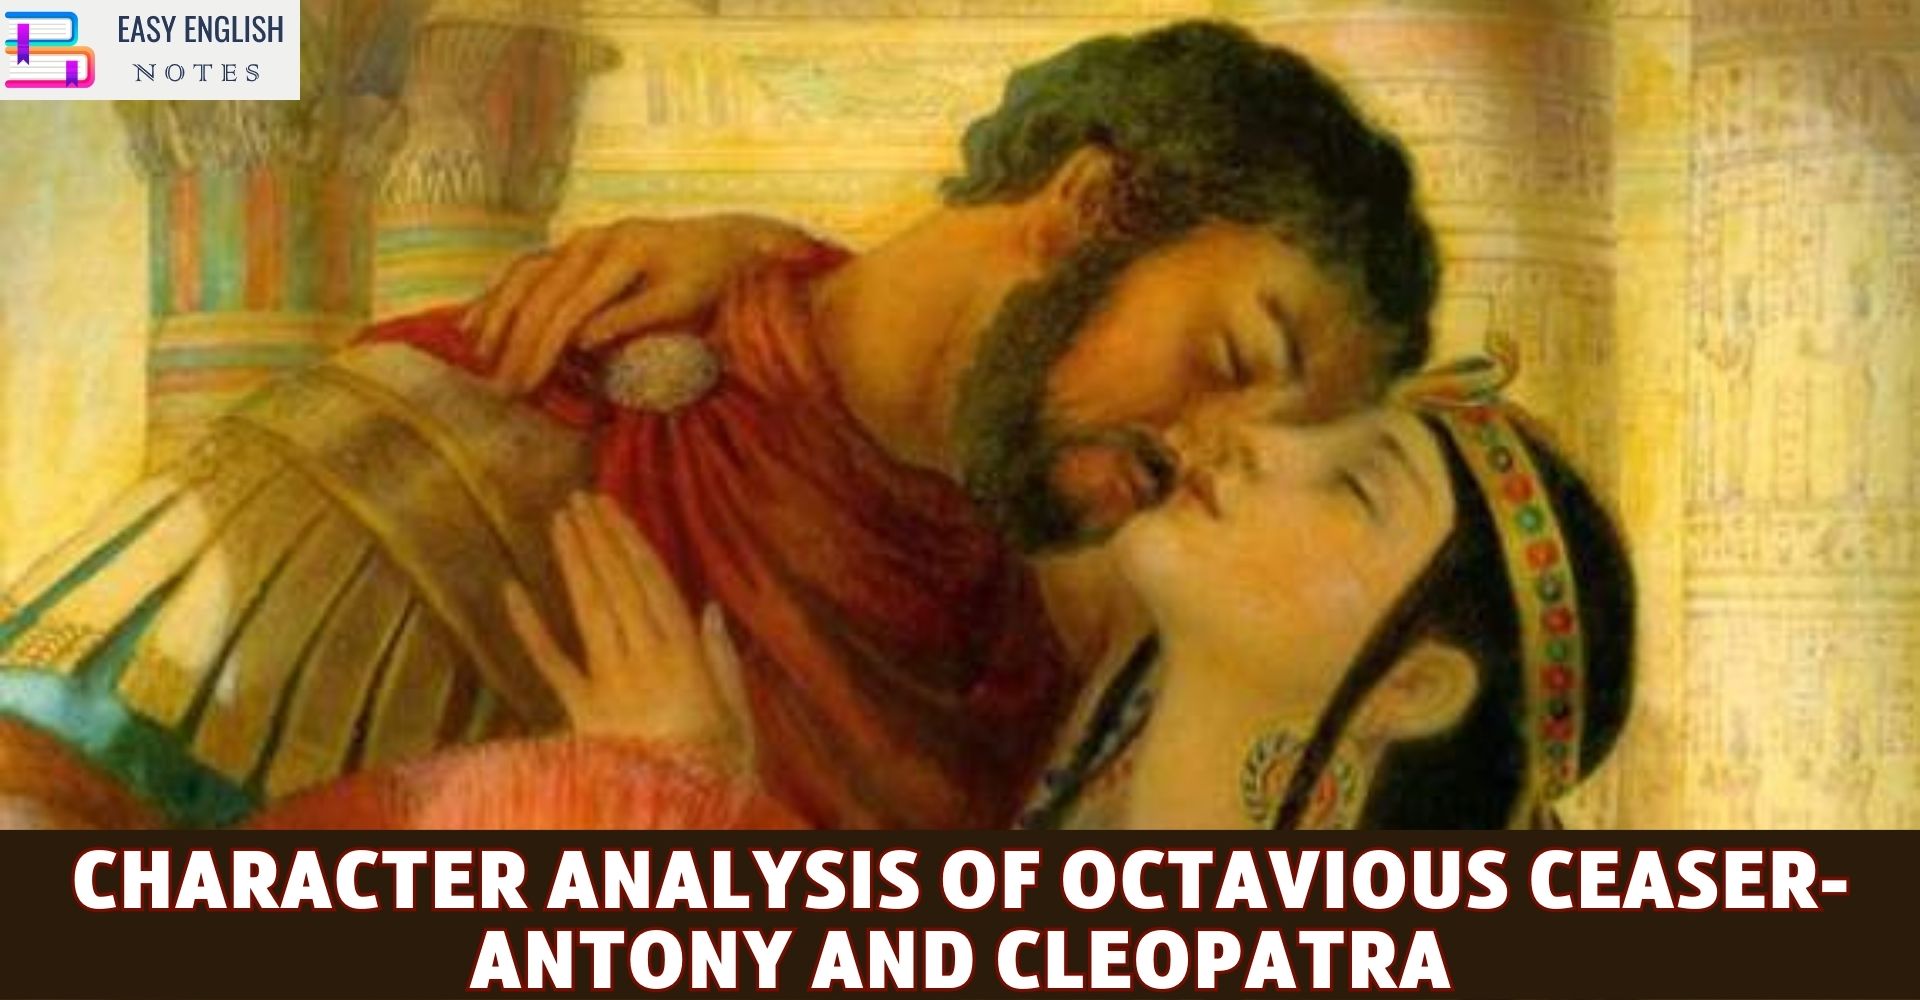 Character Analysis of Octavious Ceaser- Antony and Cleopatra